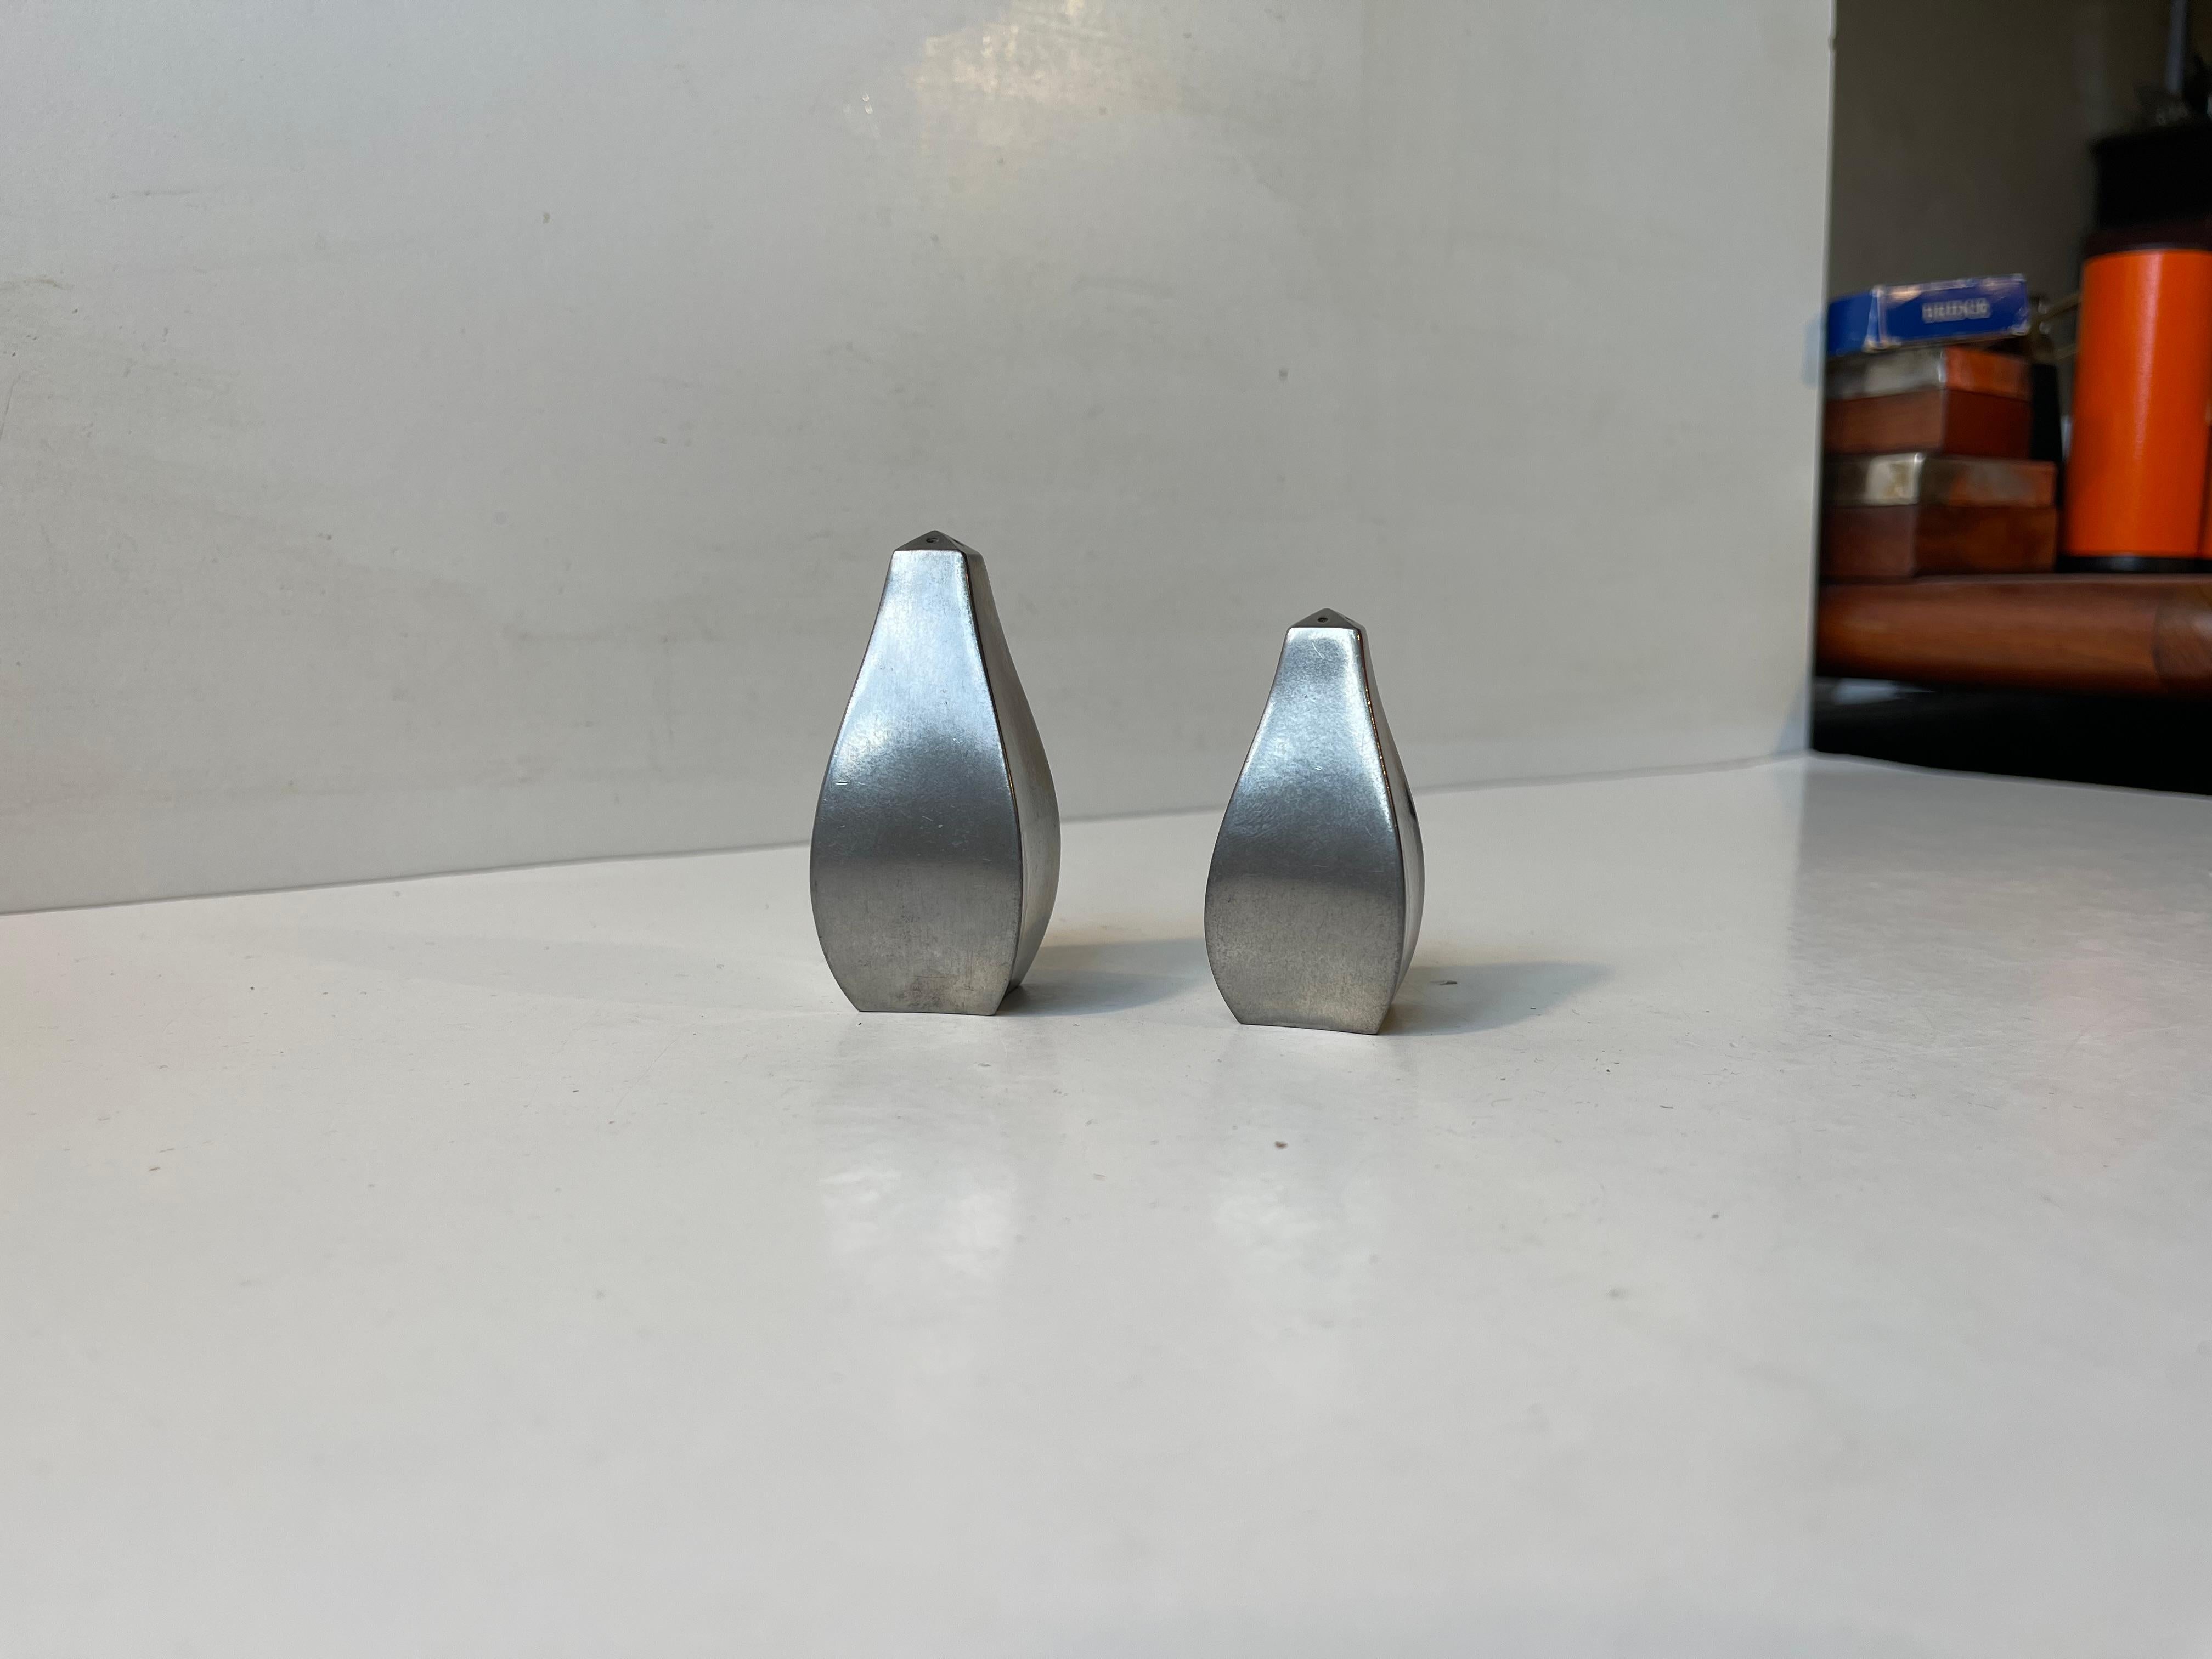 A stylish and elegantly curved salt and pepper shaker set. Made from pewter and designed by Just Andersen in Denmark during the 1930s. Fully marked and with original stoppers. Measurements: H: 7.5/6 cm, W/D: 3.5 cm.

Free World wide express shipping.